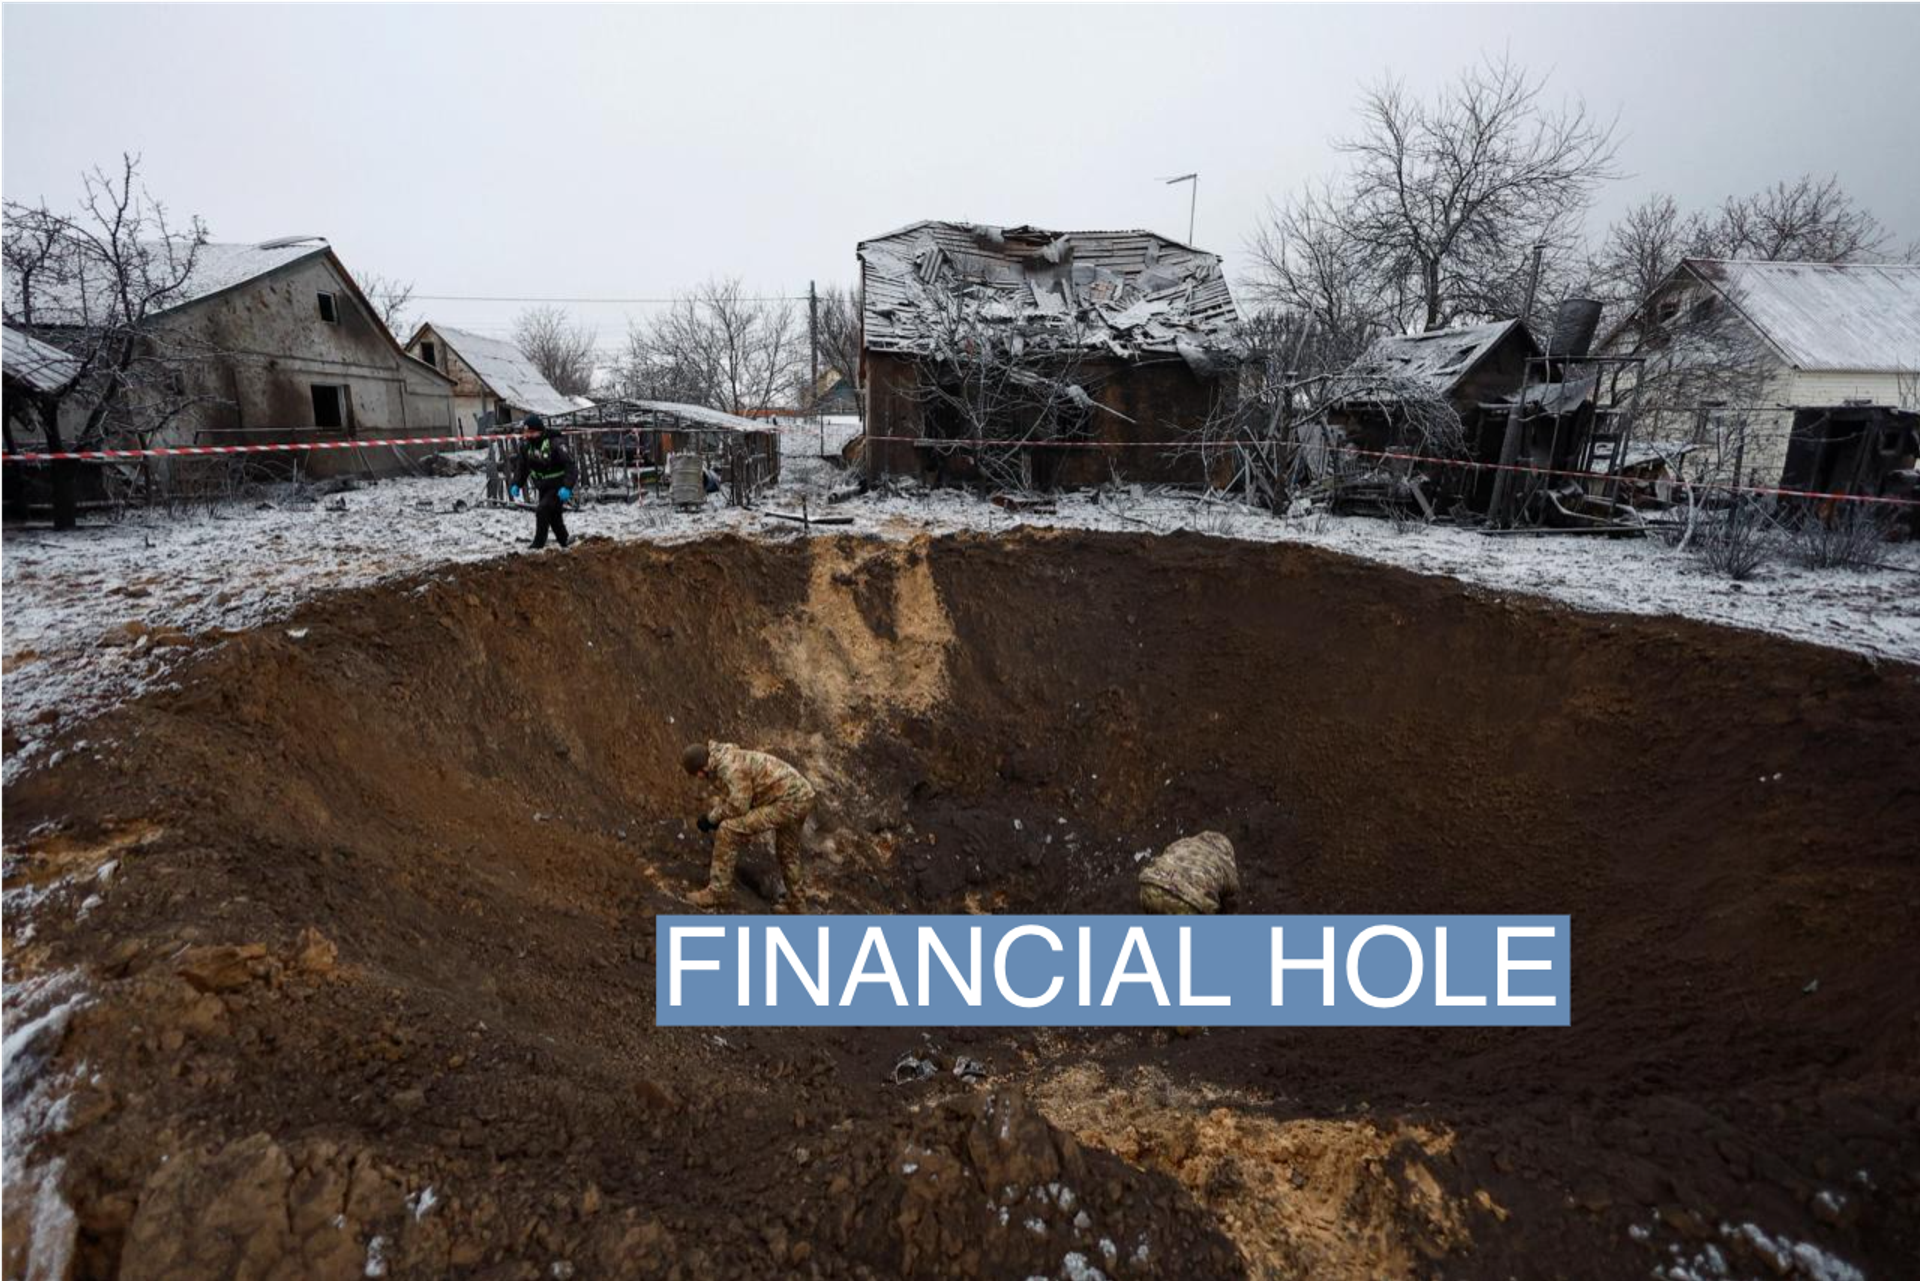 Police officers collect parts of a missile inside a crater after a Russian strike on Kyiv on Dec. 11.